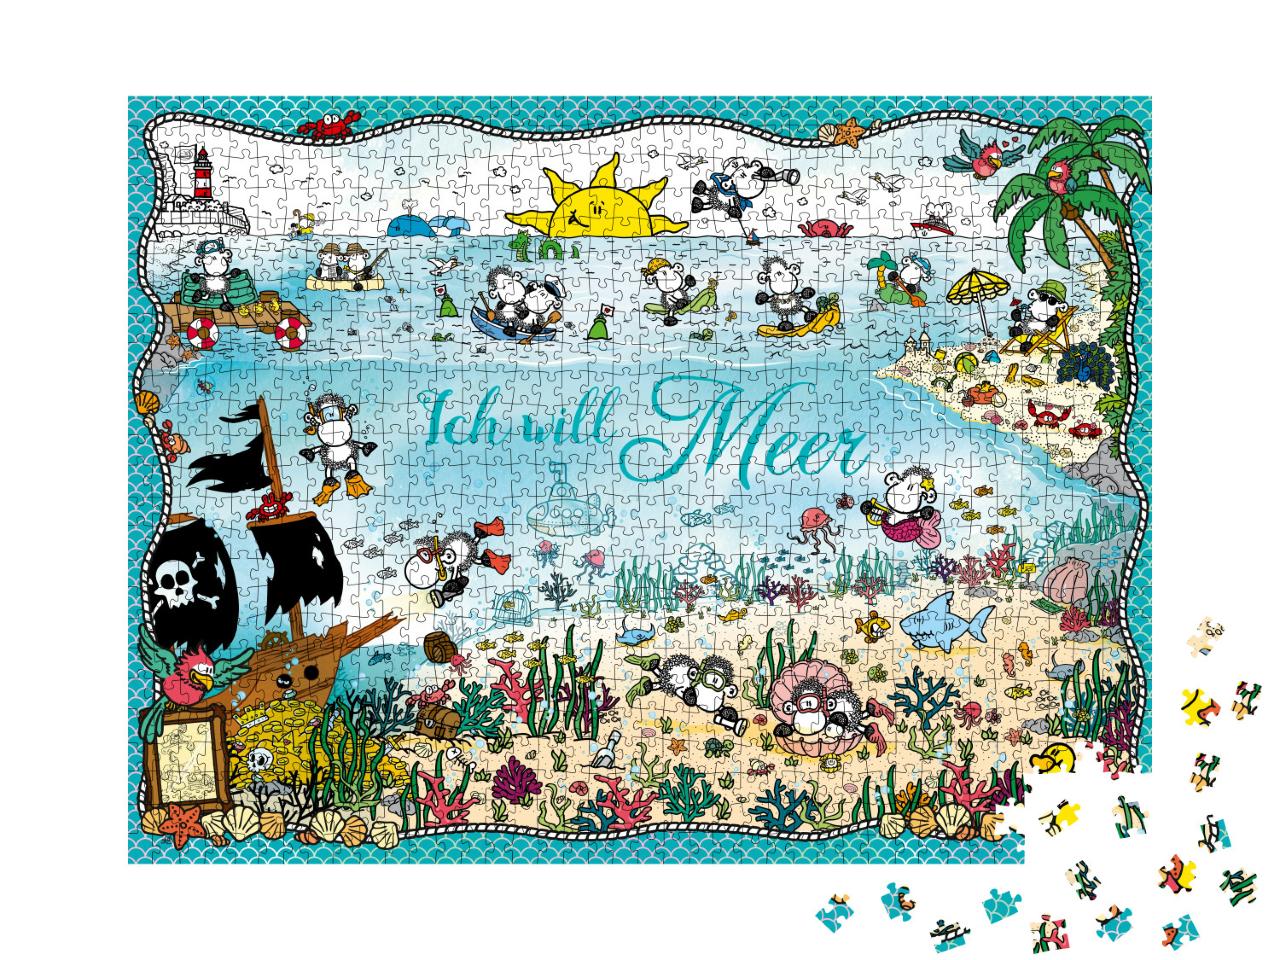 Puzzle 1000 Teile „Ich will Meer“